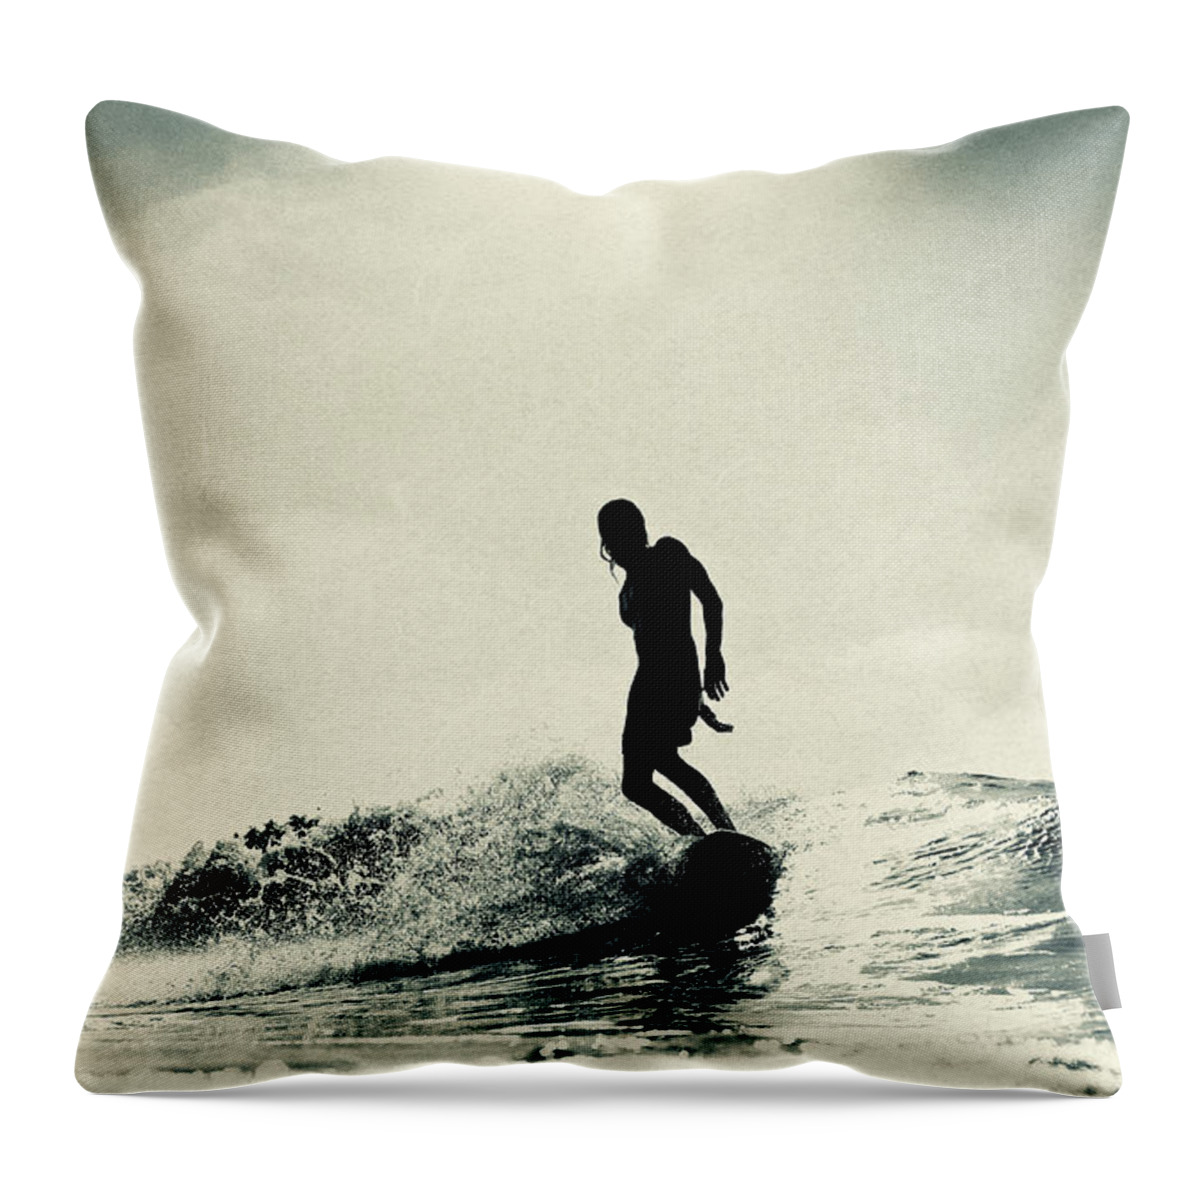 Surfing Throw Pillow featuring the photograph Cruise Control by Nik West